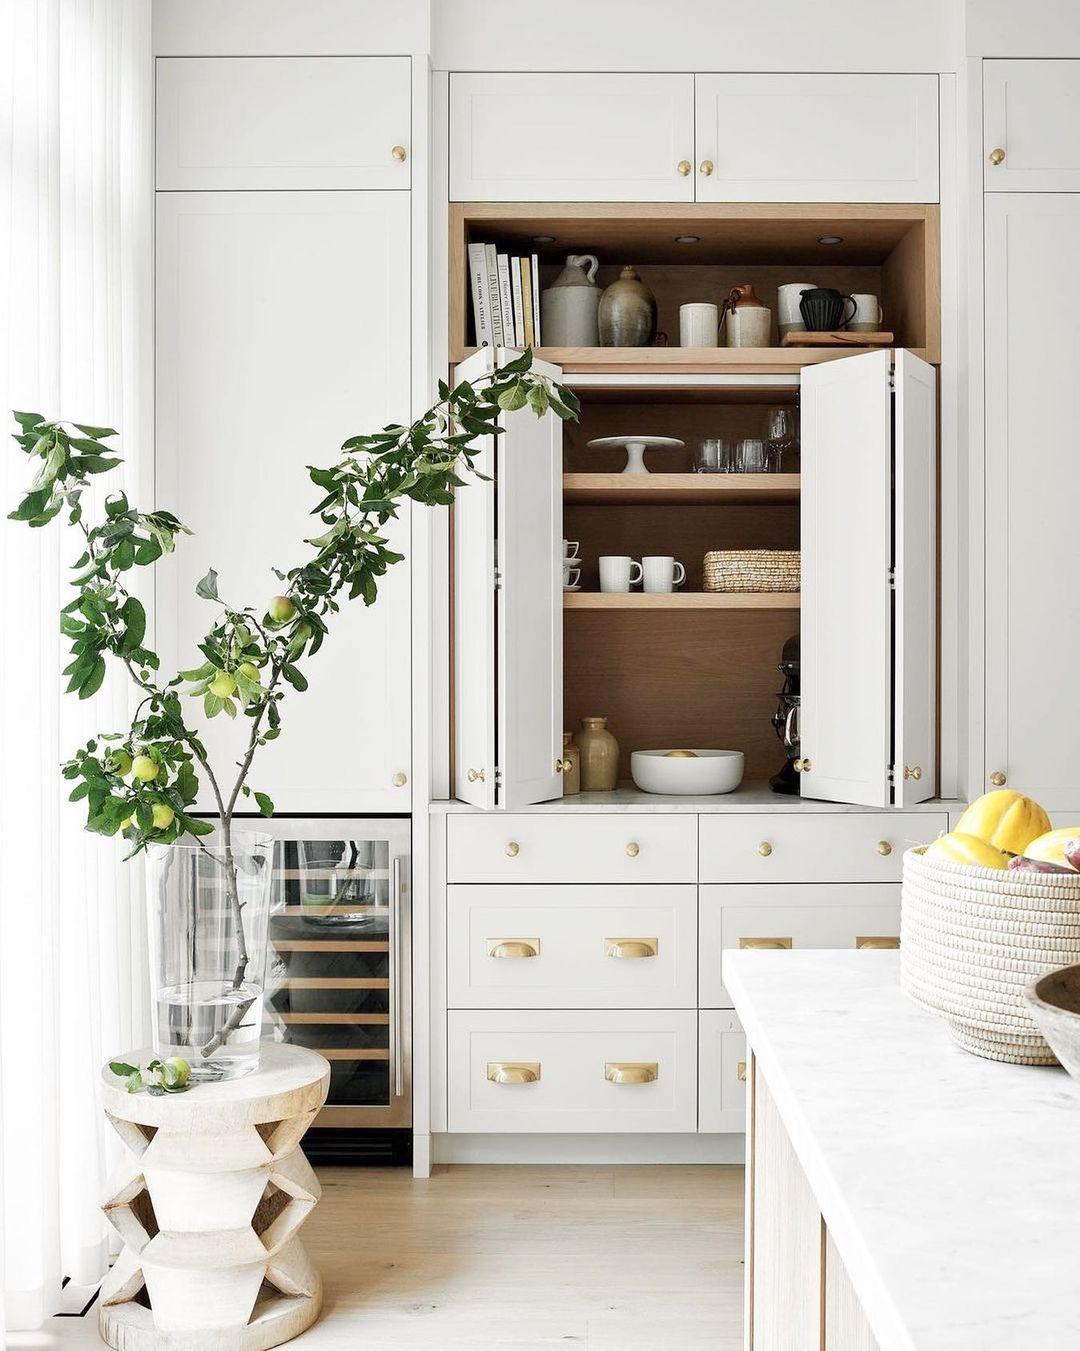 How to Create an Instagram-Worthy Kitchen - uncluttered open shelves